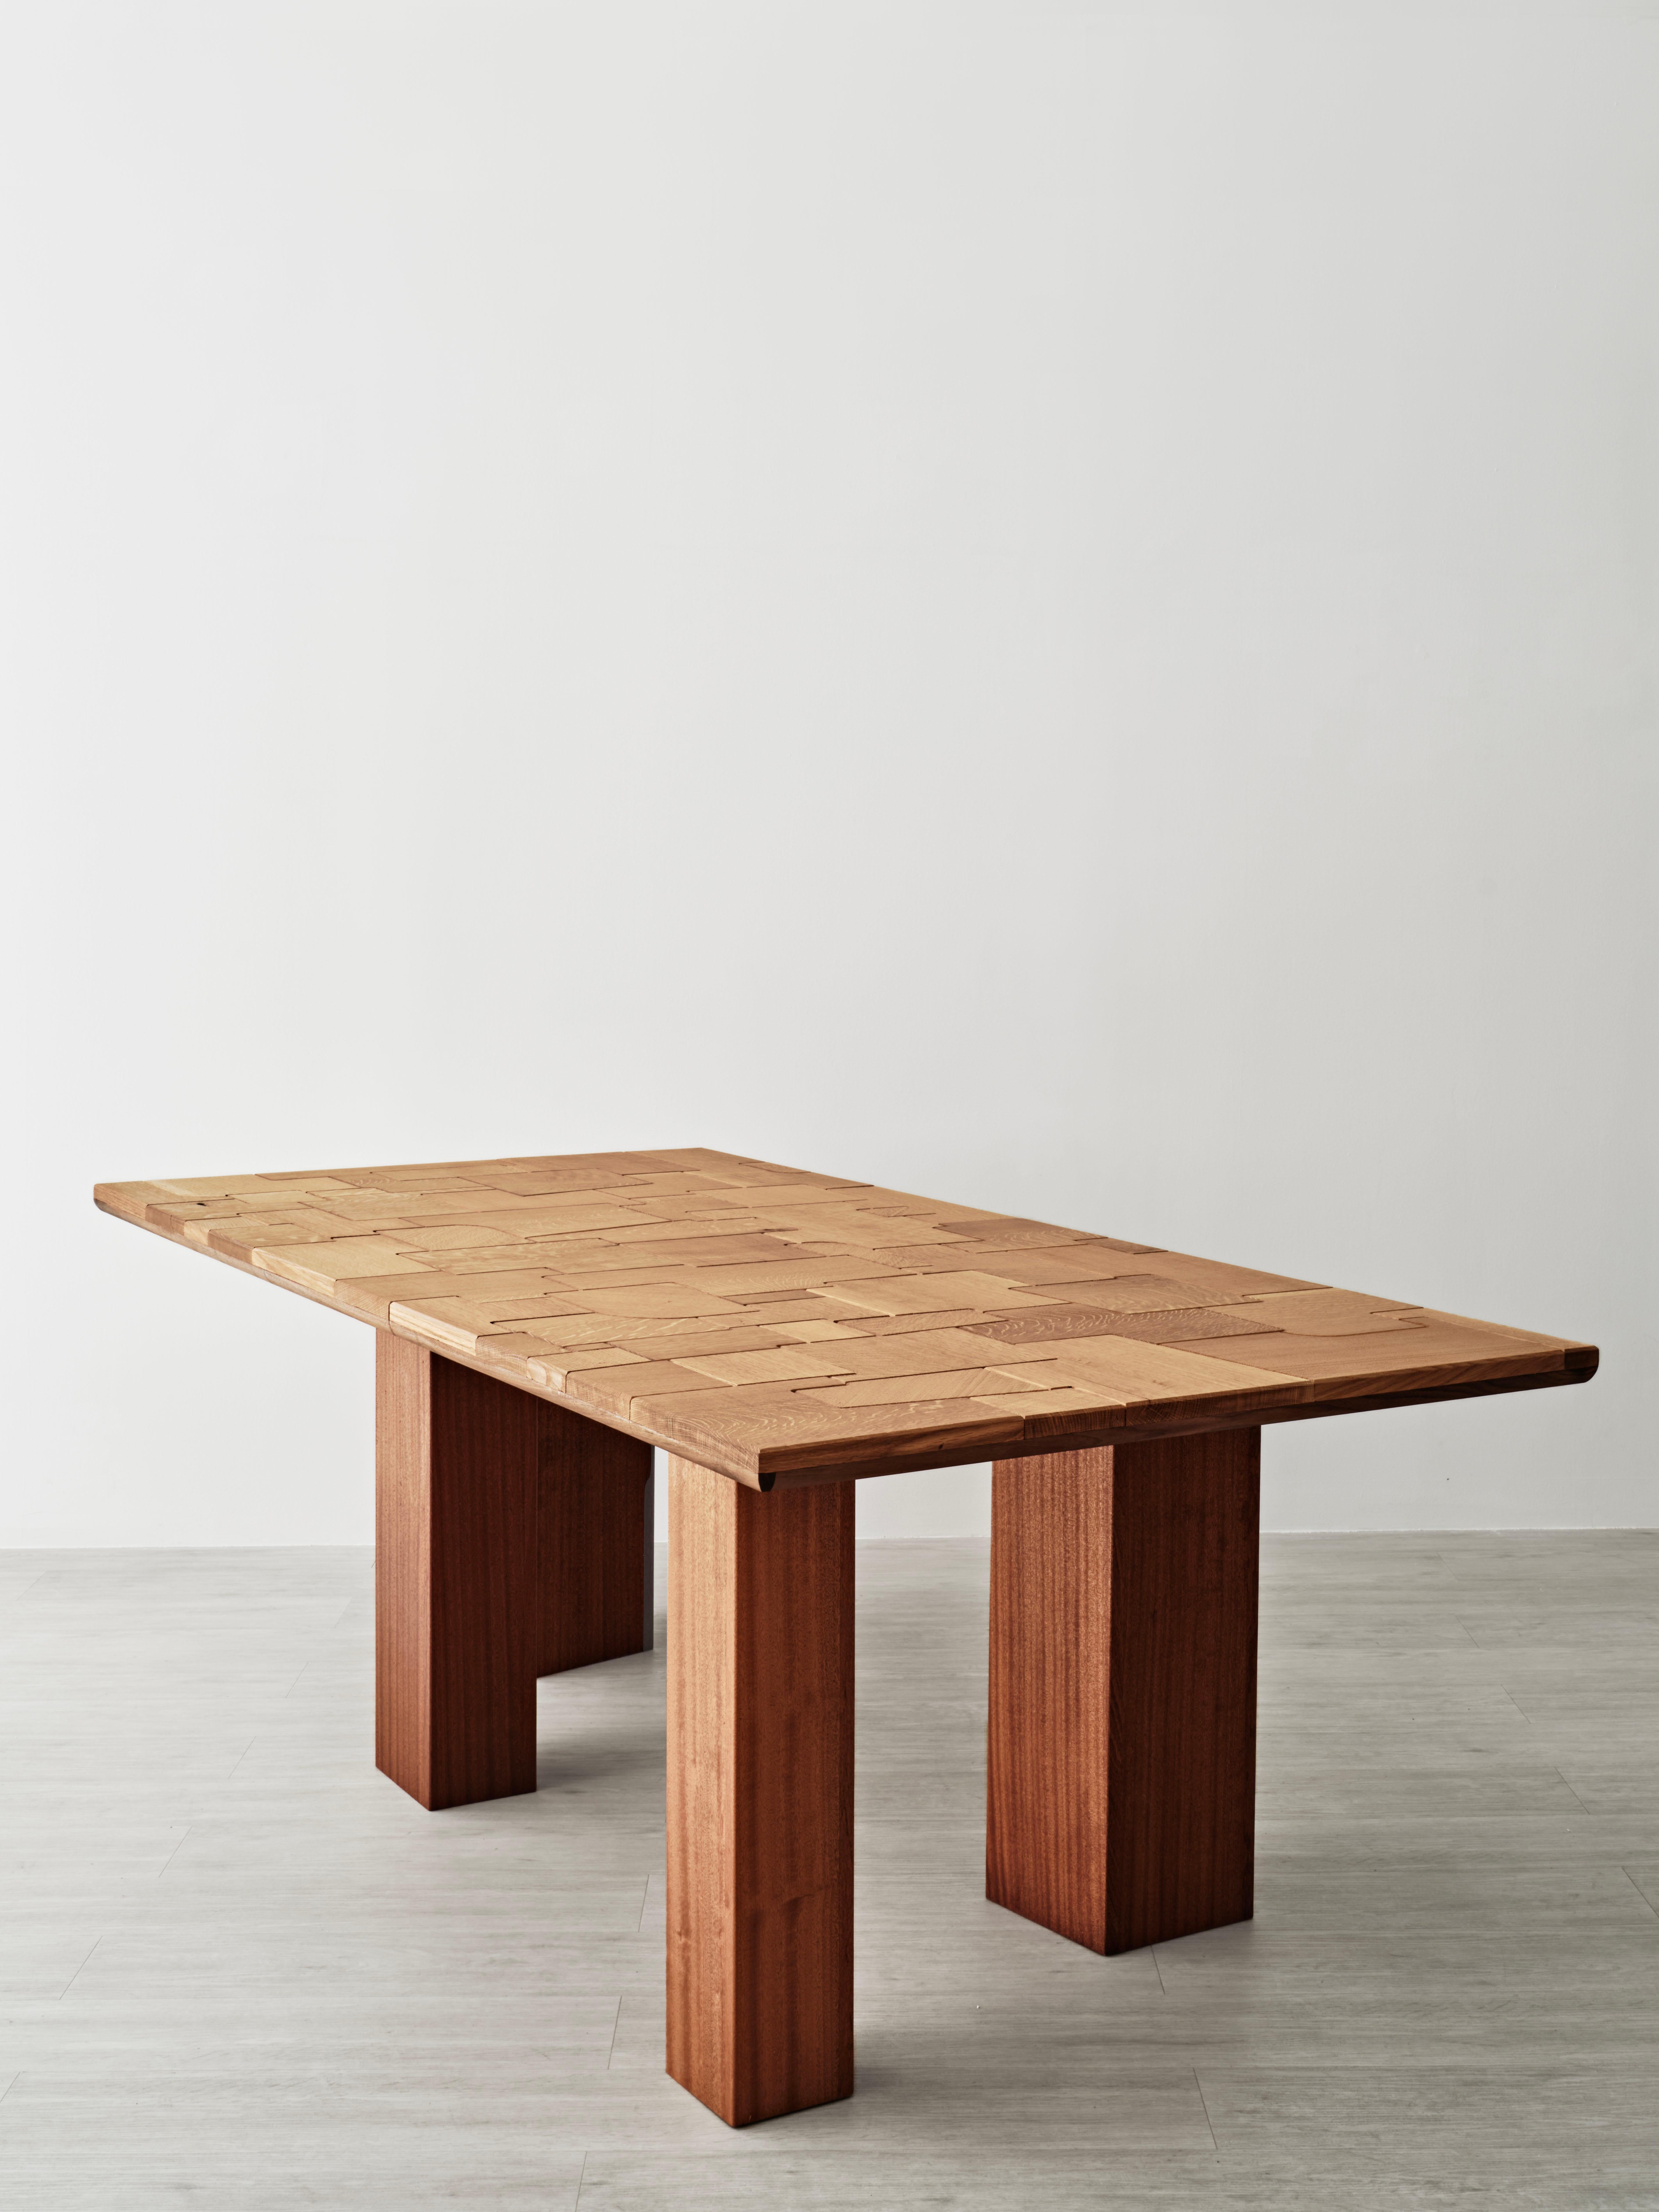 Each patchwork table is a unique piece, composed of hand-selected timbers which are laid out to create a composition that honors the characteristics of the wood while responding to proportion and the function of the piece. Shown here in white oak,